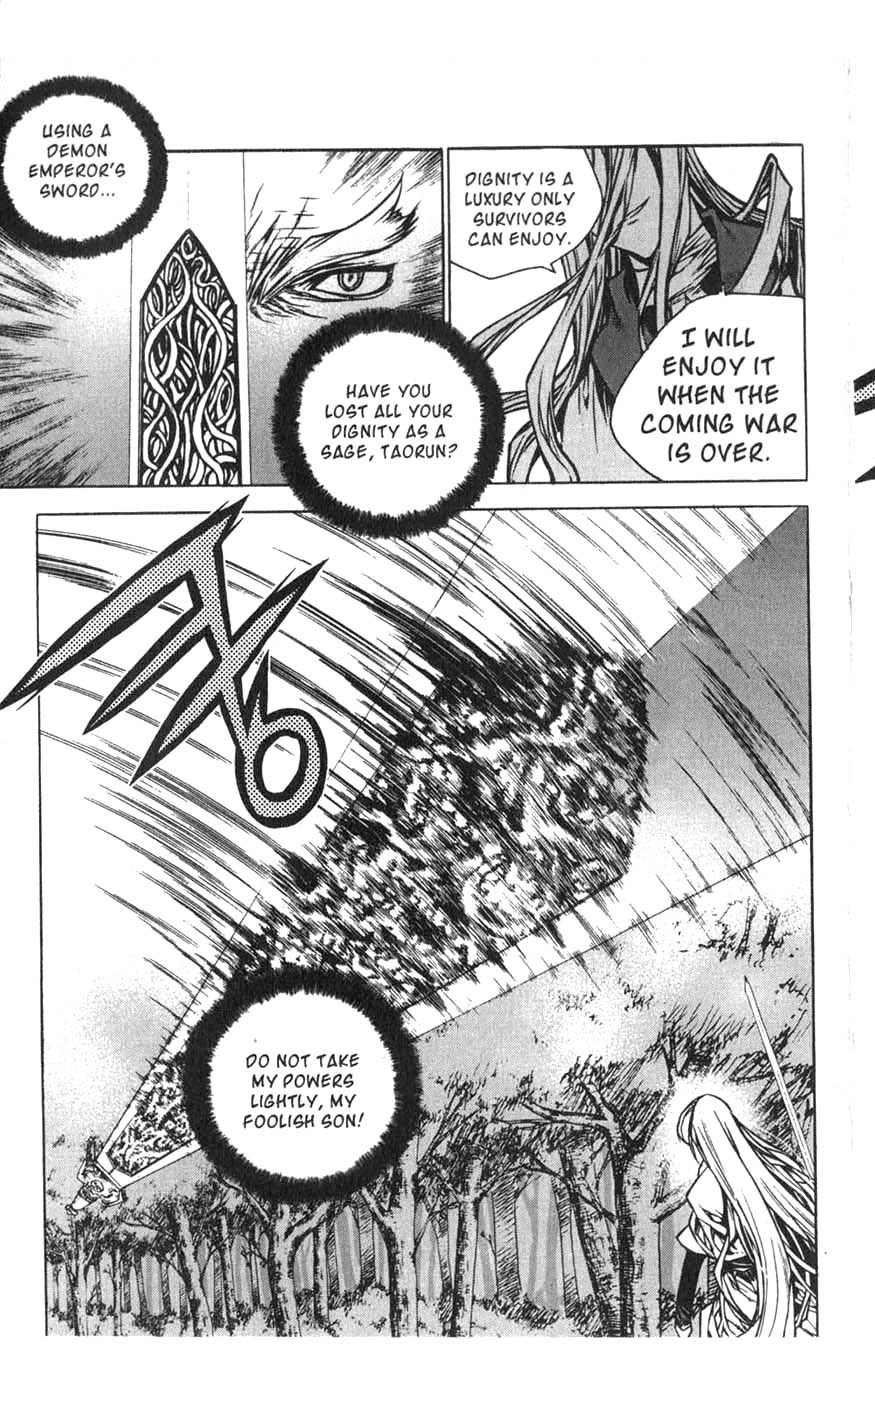 Chronicles of the Cursed Sword Vol. 18 Ch. 73 Taorun's Past